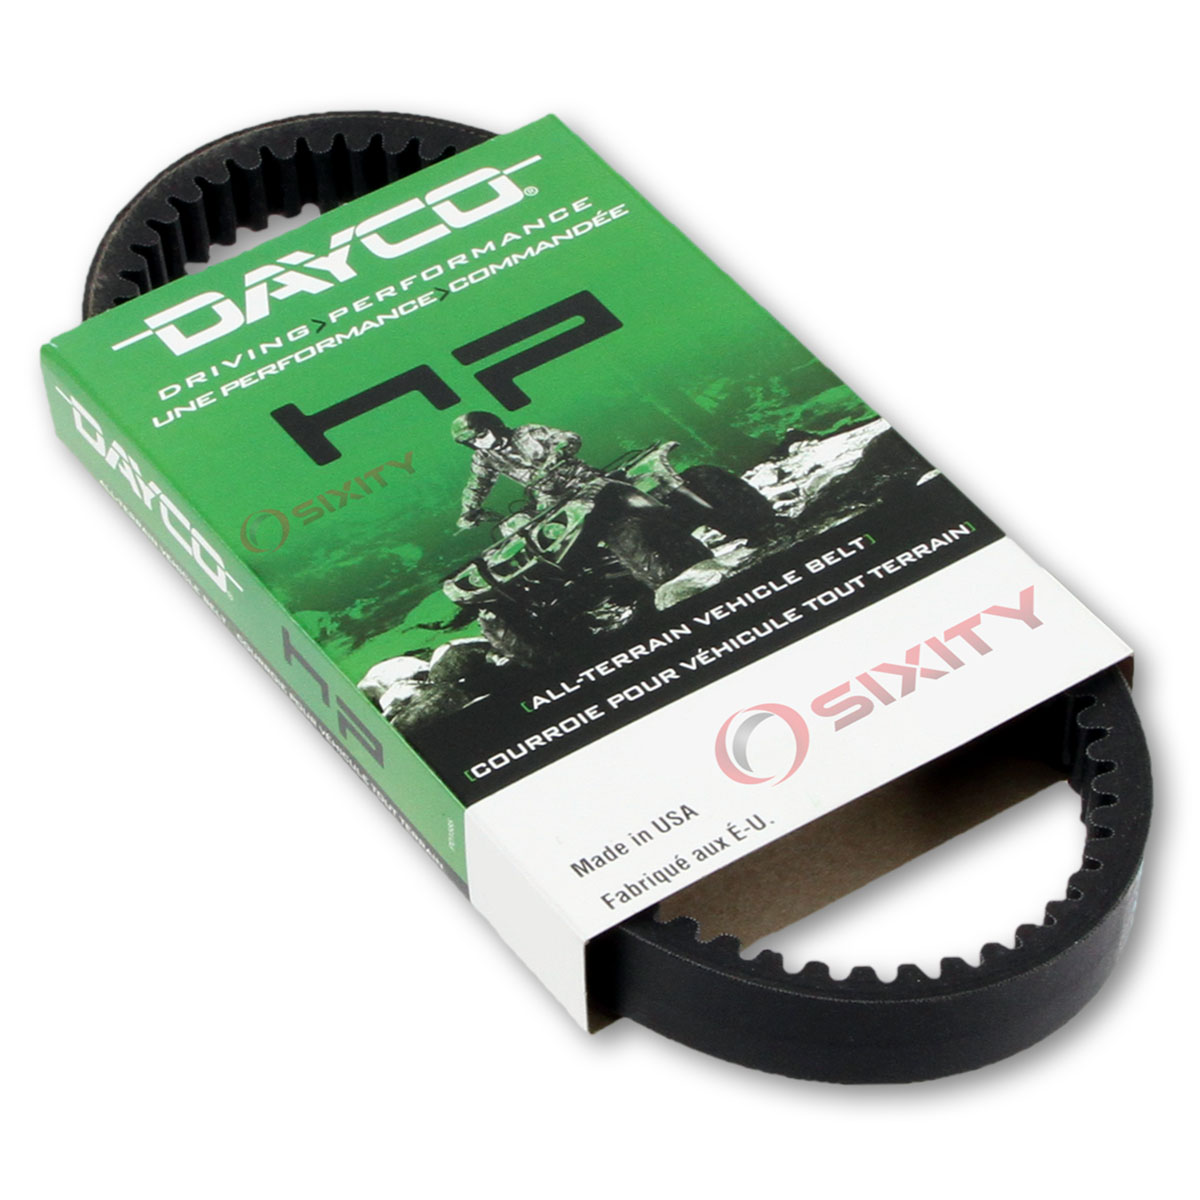 Dayco HP Drive Belt for 2006-2008 Arctic Cat 400 4x4 Auto TRV